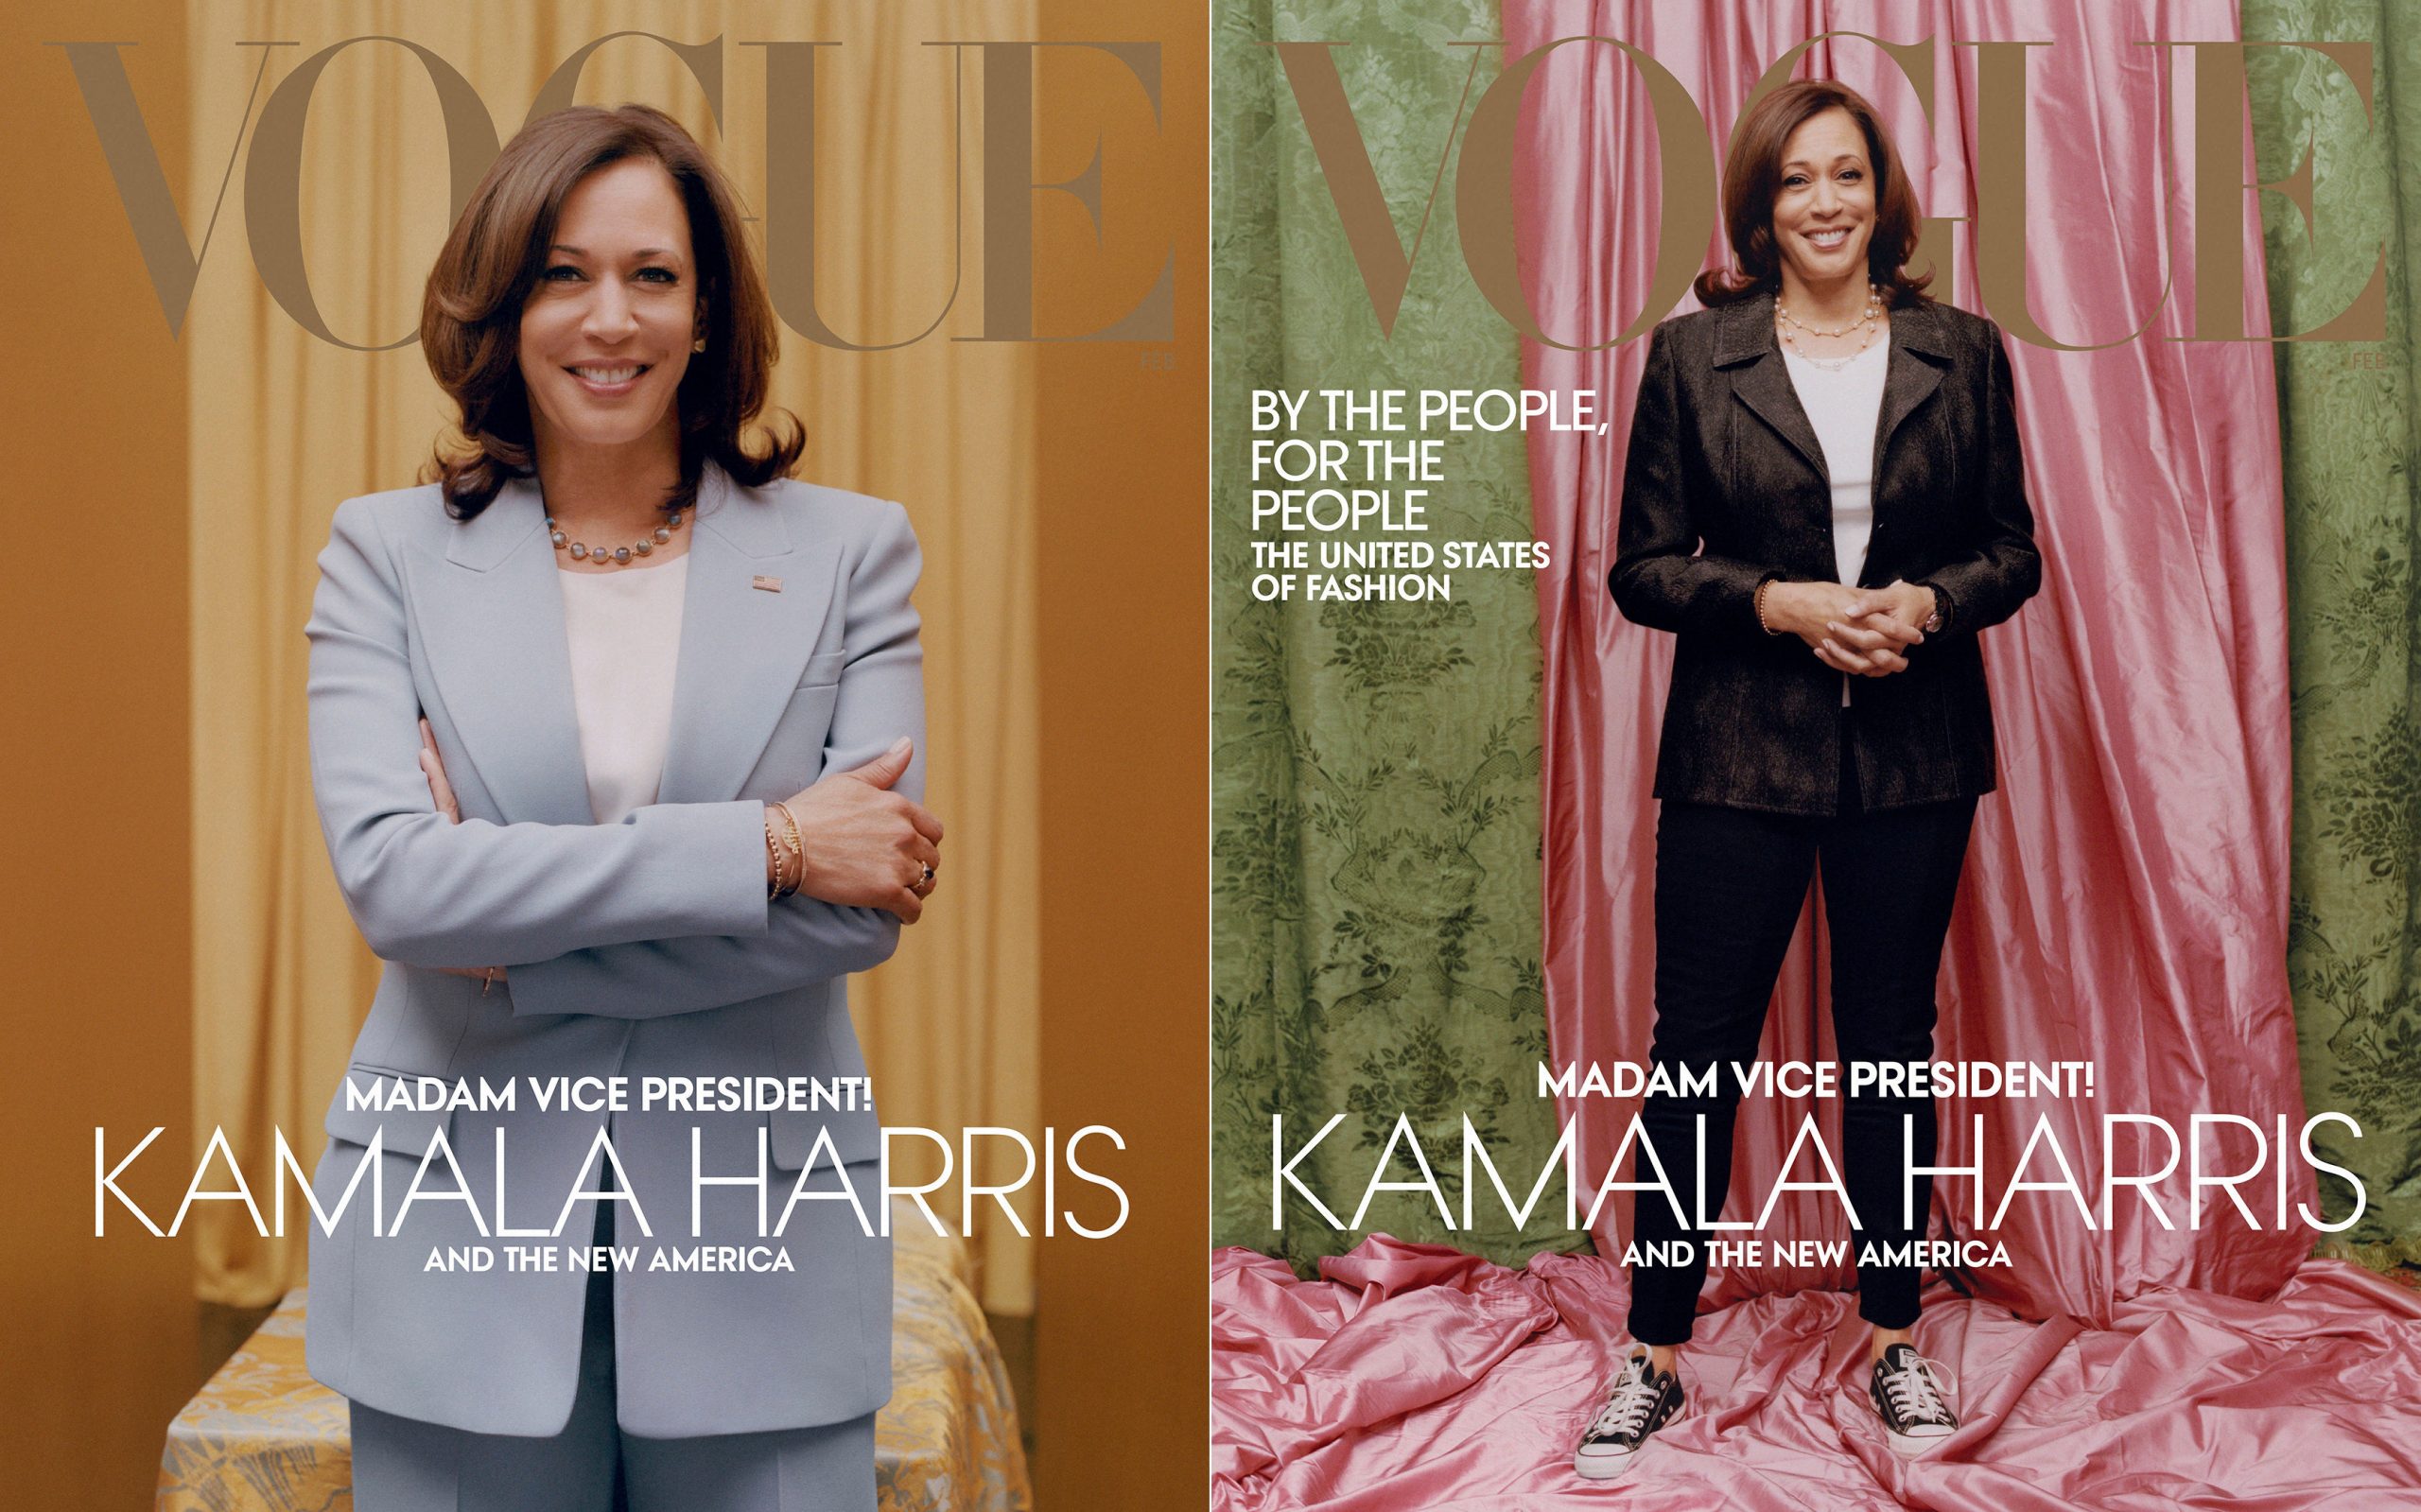 Vogue to release new cover featuring Kamala Harris after backlash